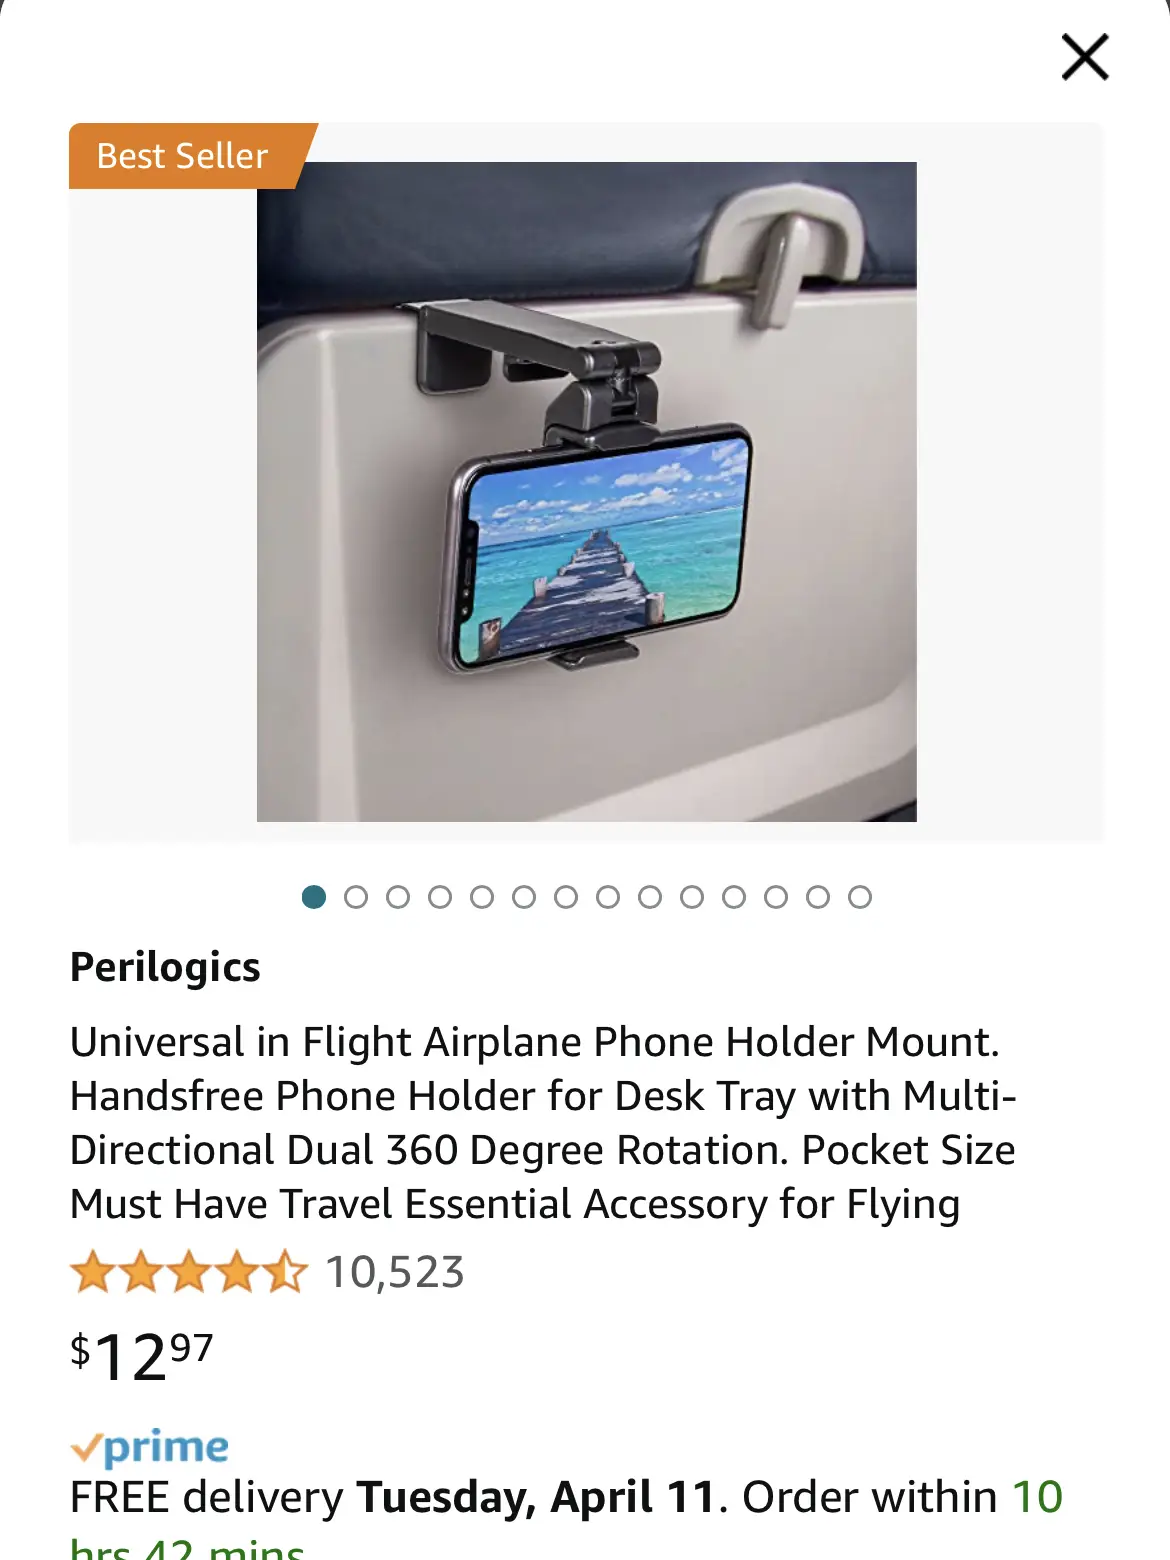 Perilogics Universal Airplane Phone Mount Review (2 Weeks of Use) 